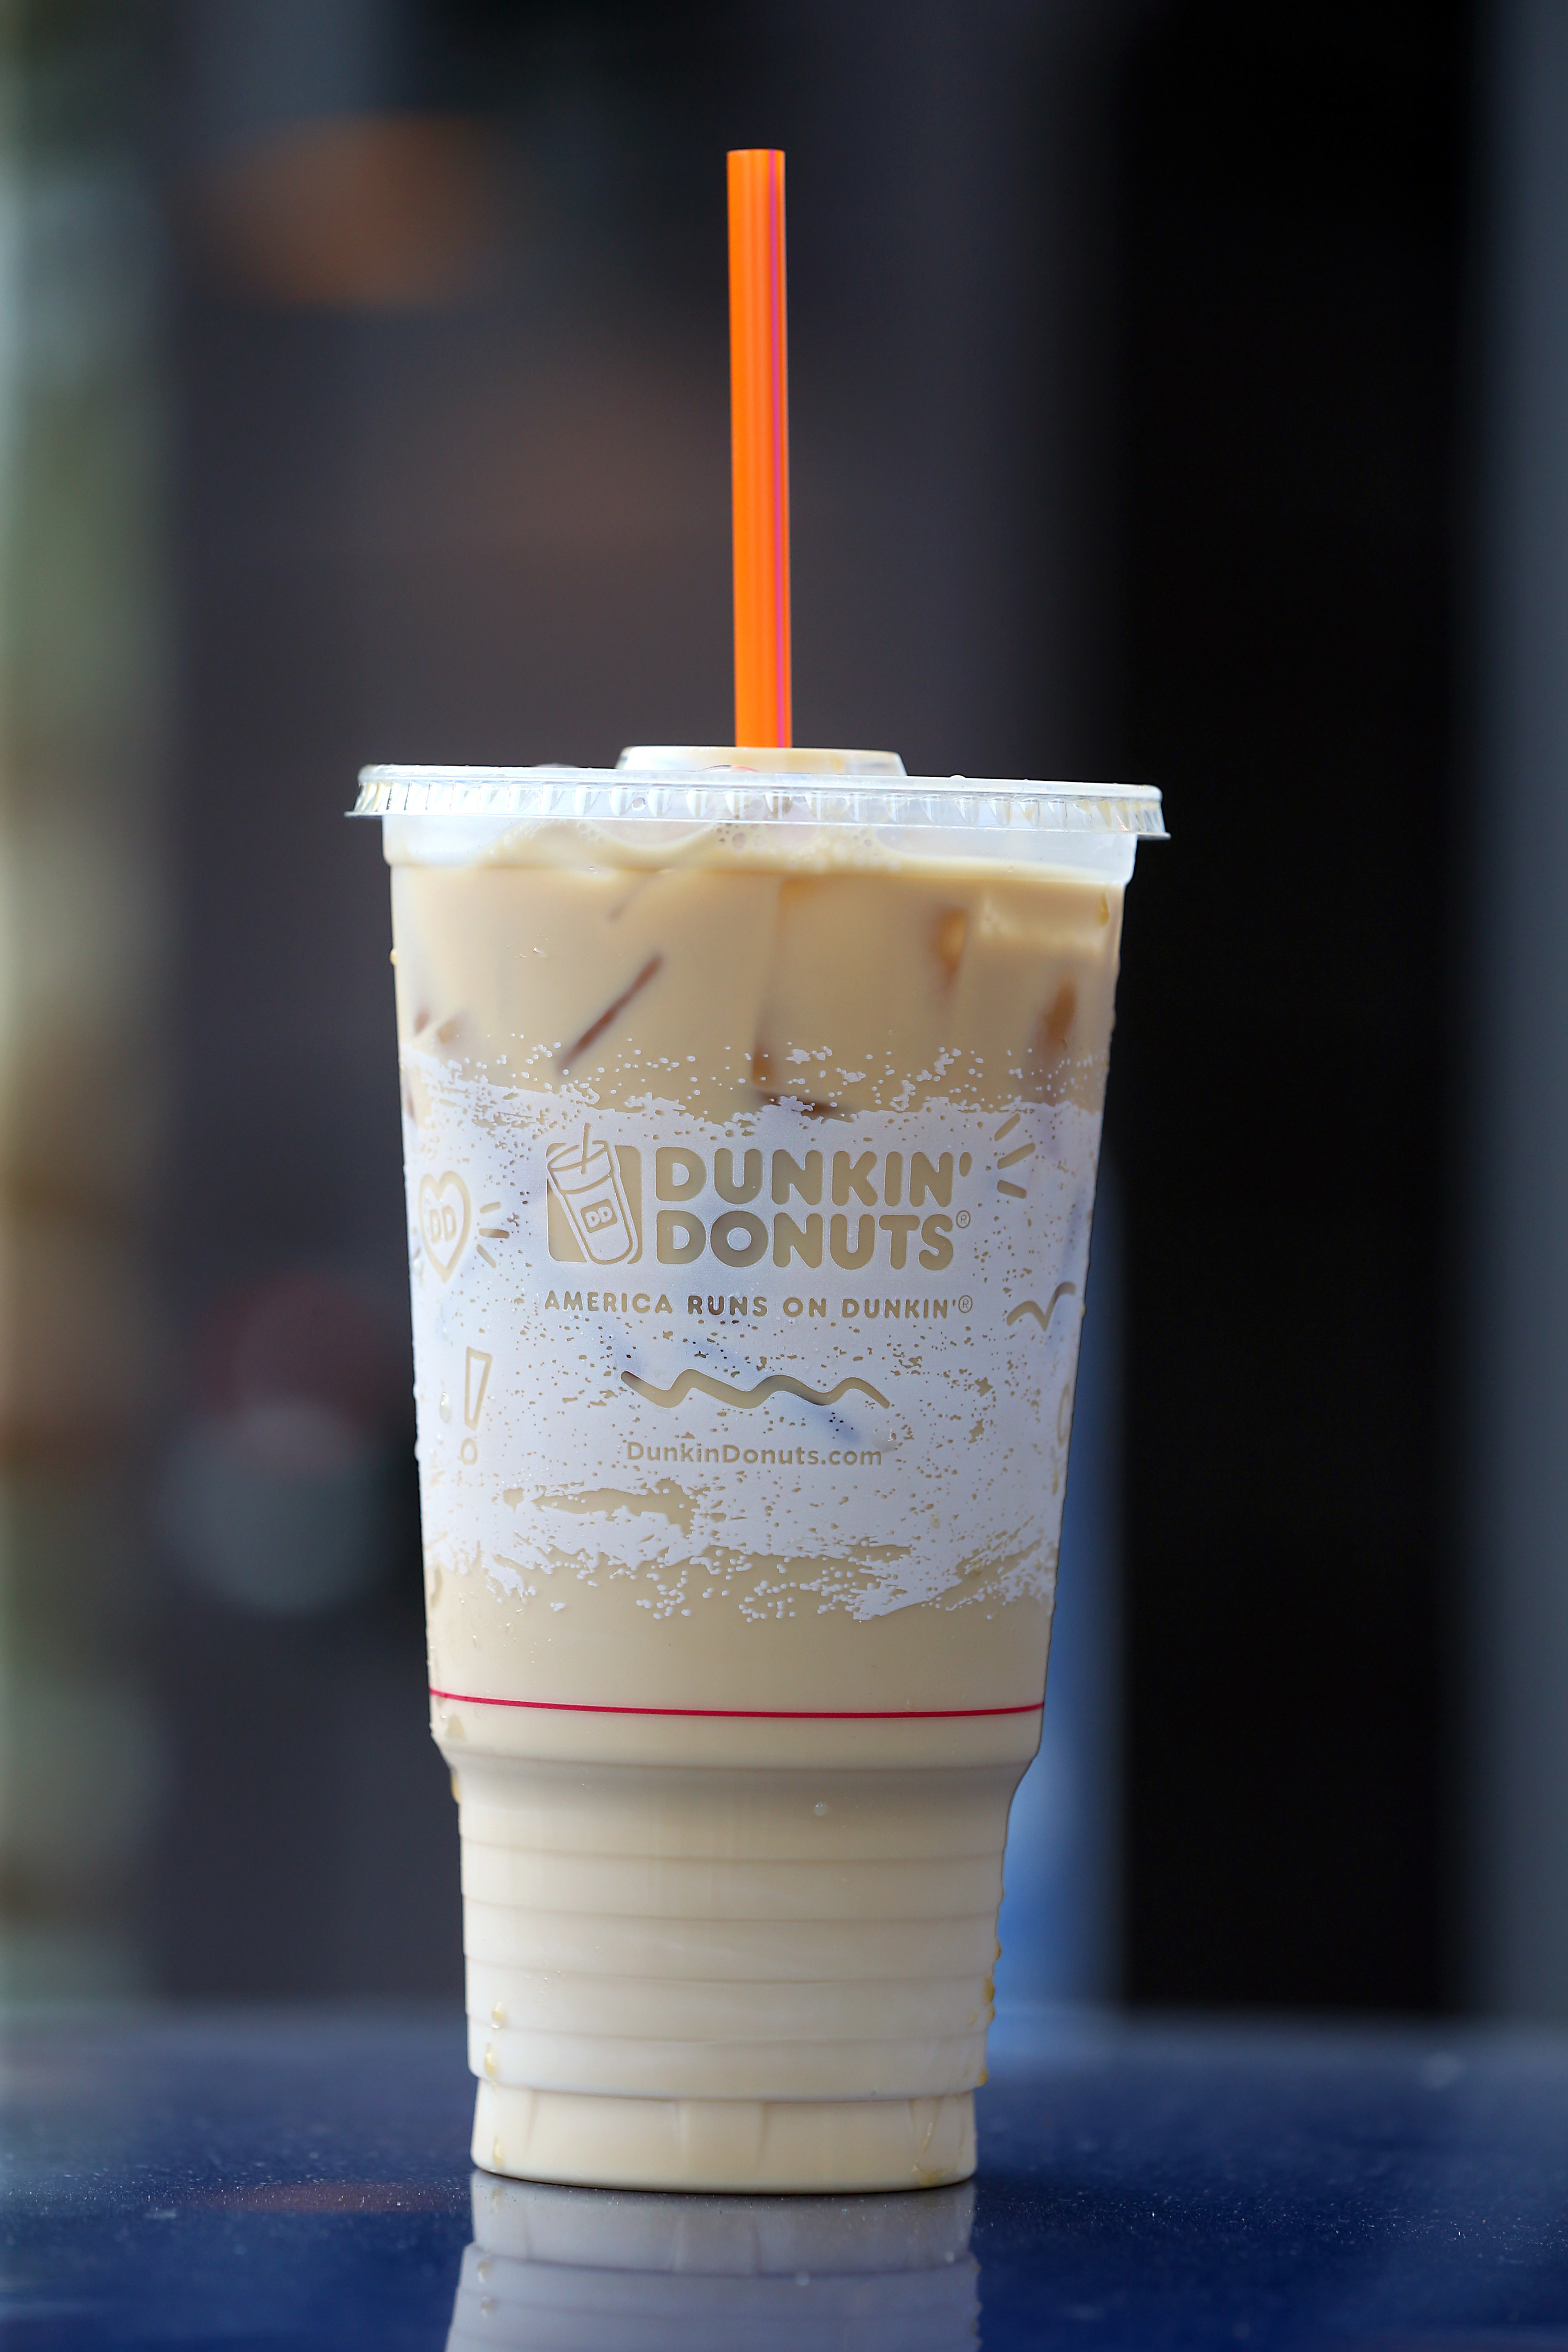 iced coffee from dunkin